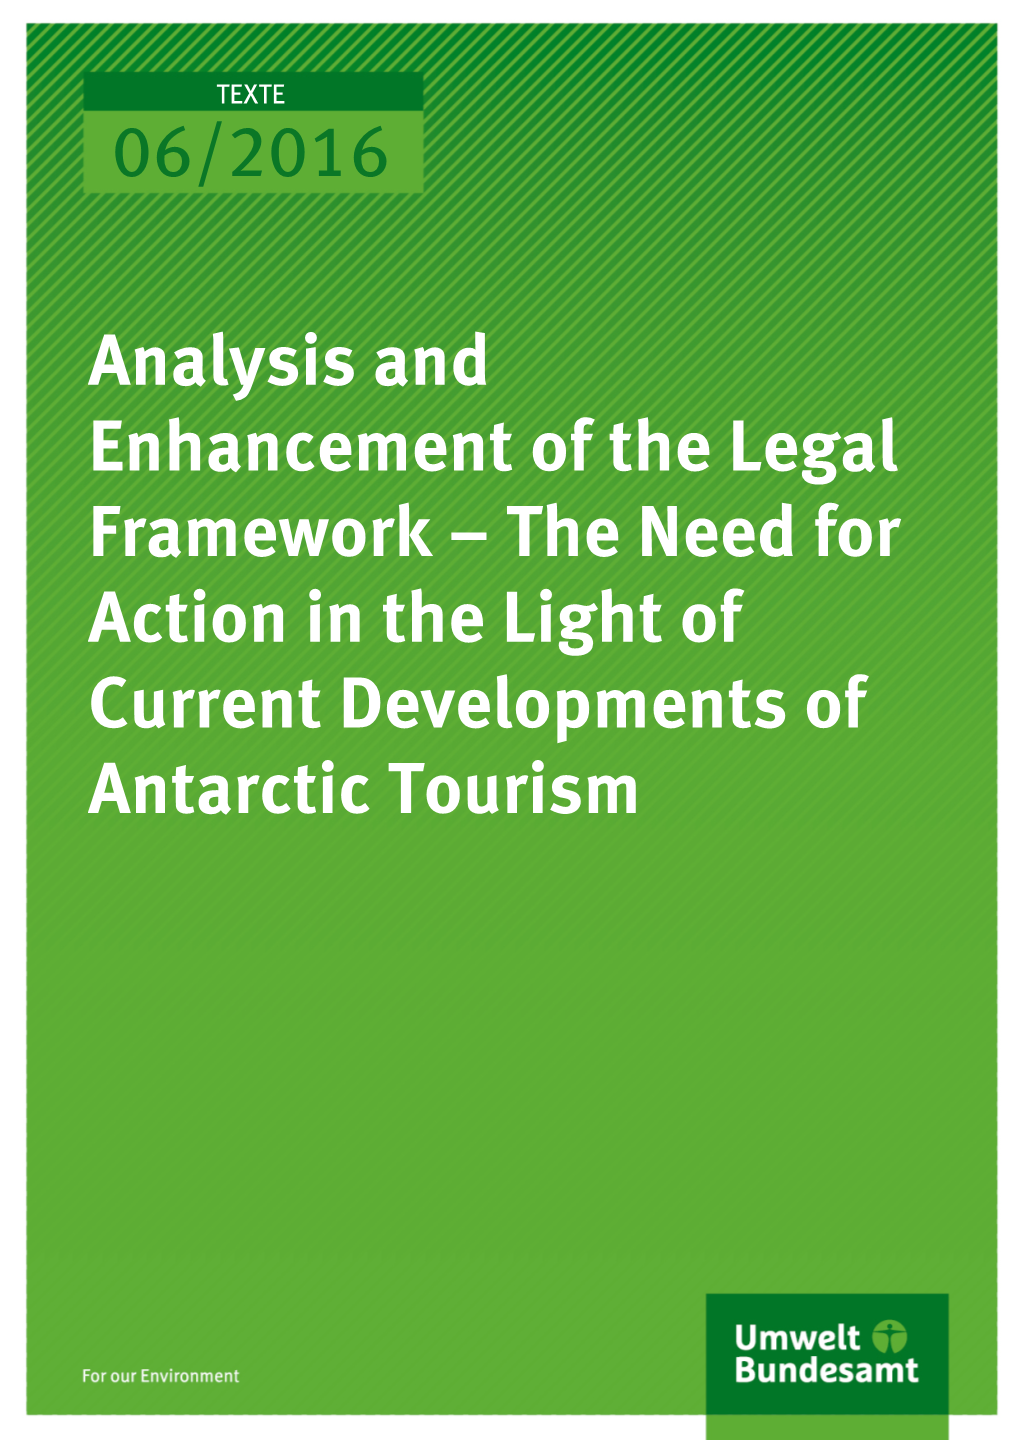 Analysis and Enhancement of the Legal Framework – the Need for Action in the Light of Current Developments of Antarctic Tourism